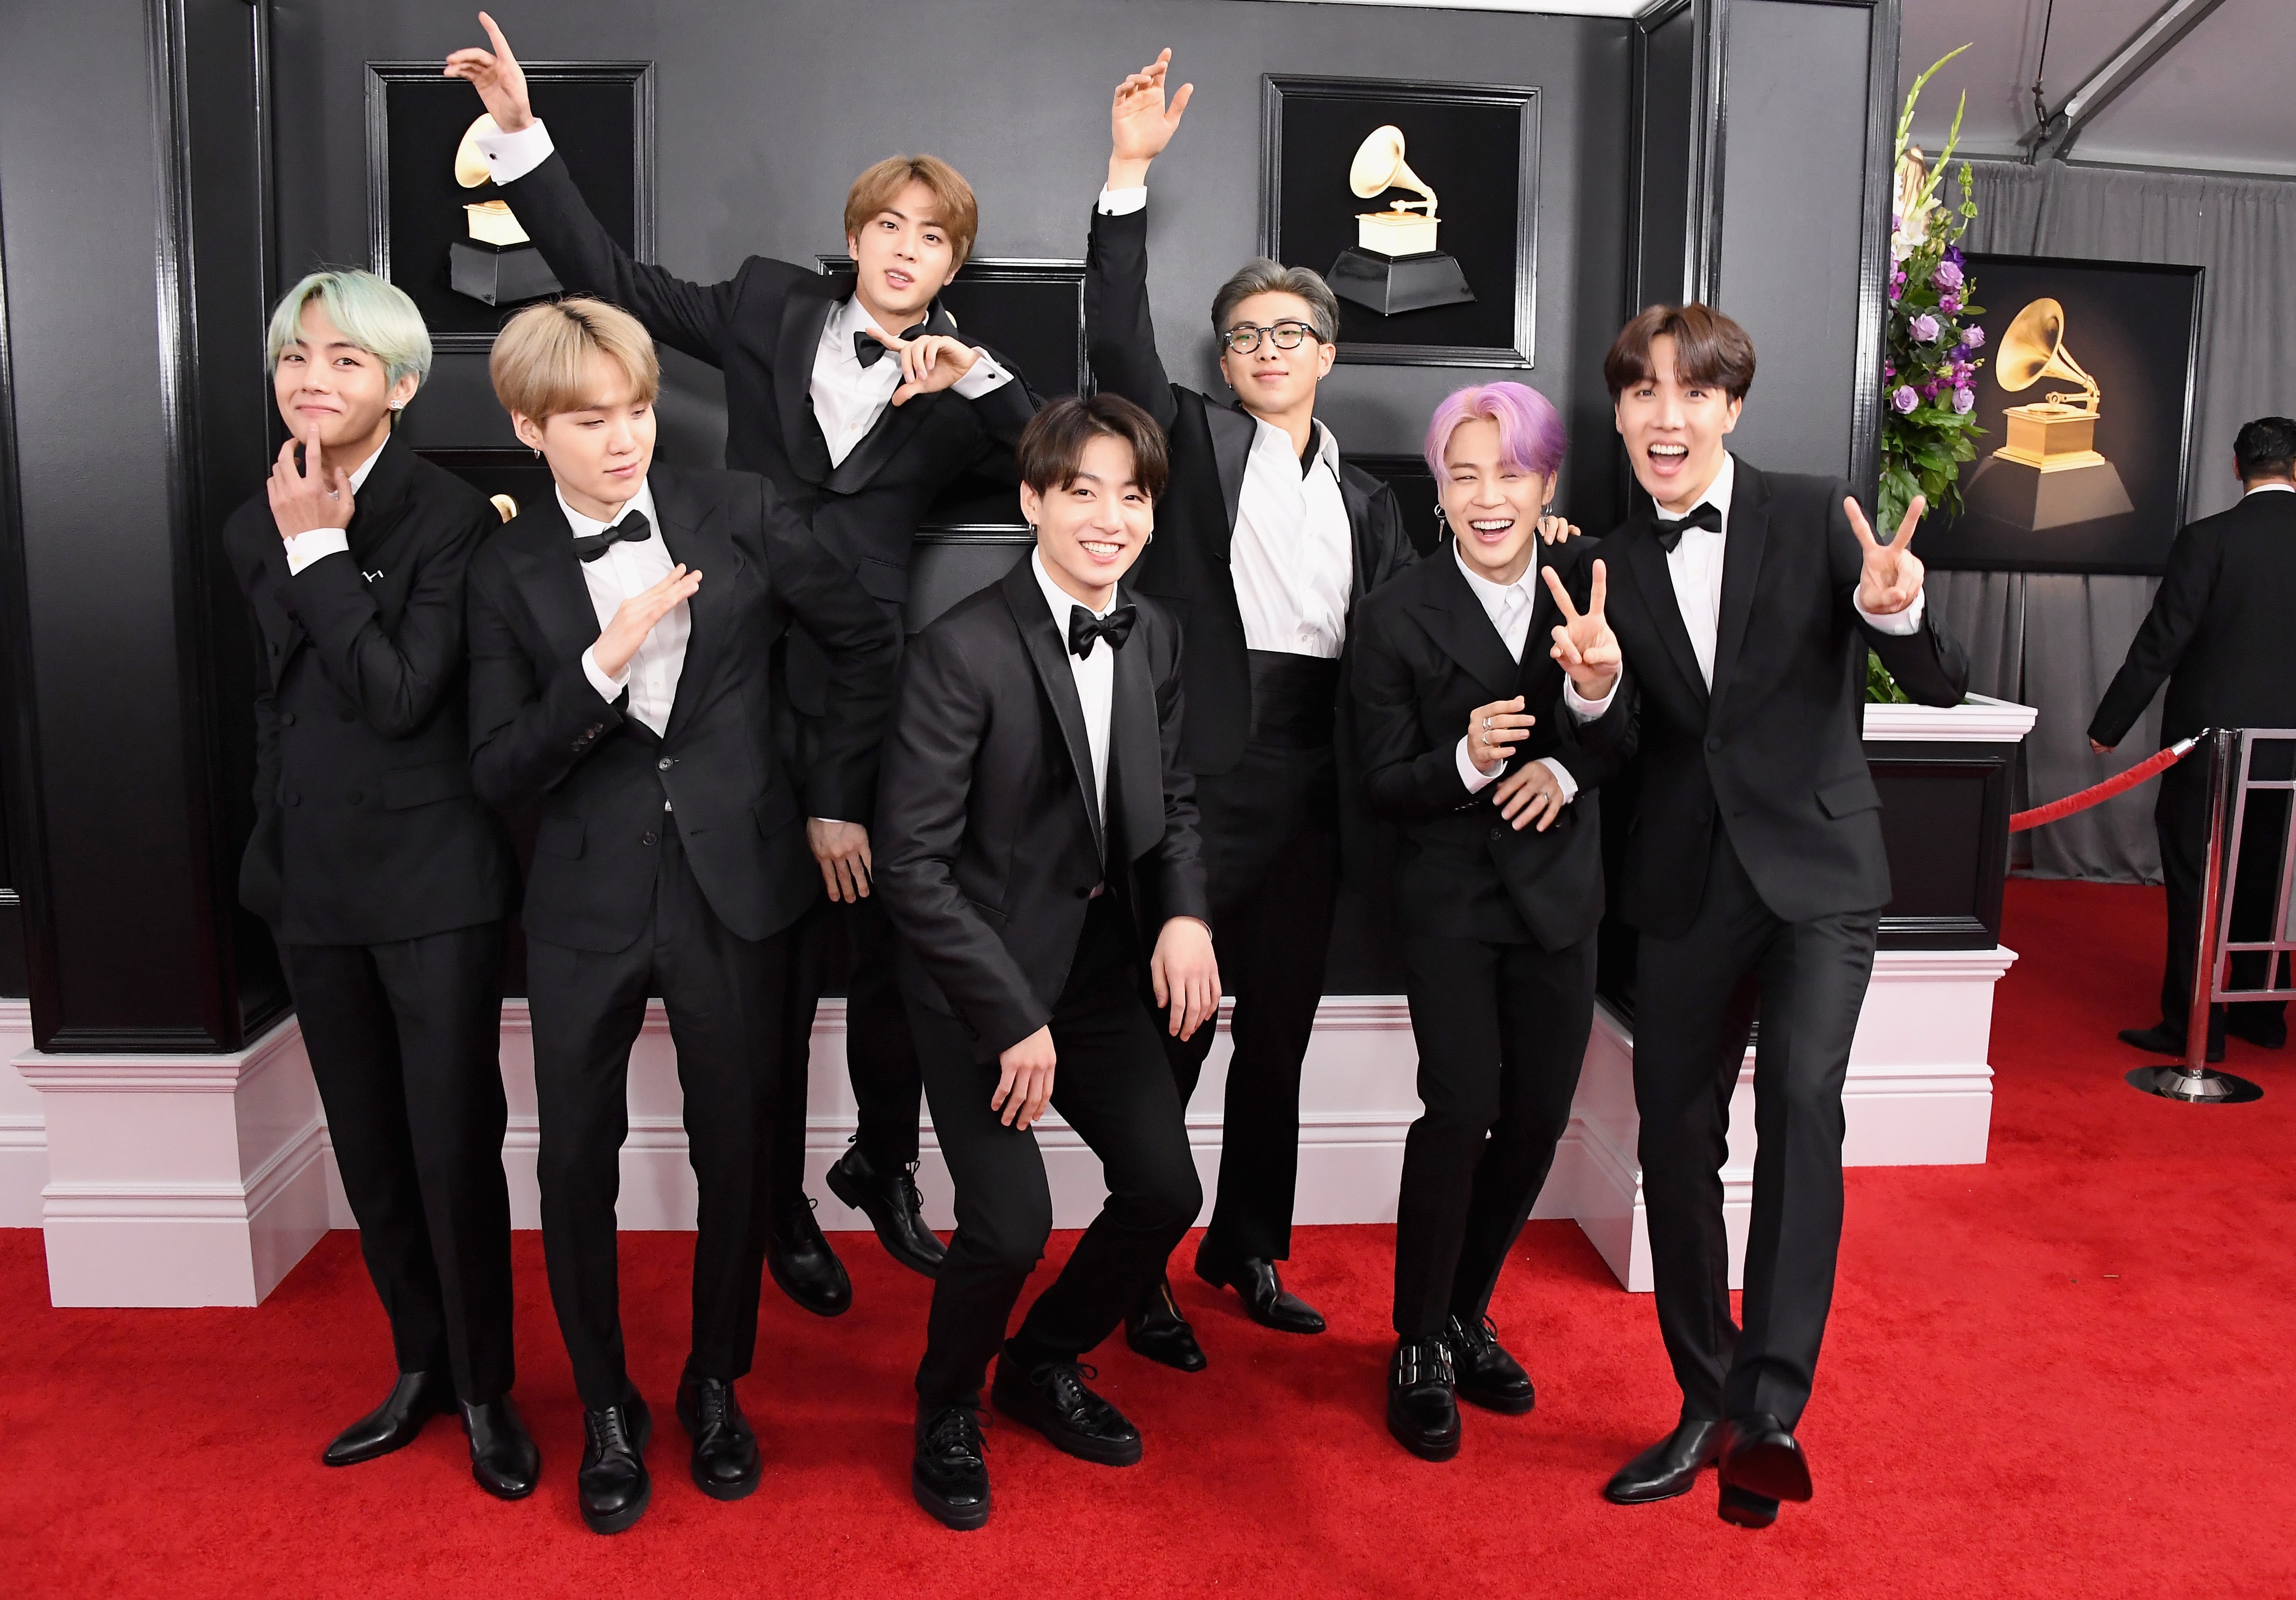 BTS lands a nomination for 63rd Grammy Awards, first for any K-pop act